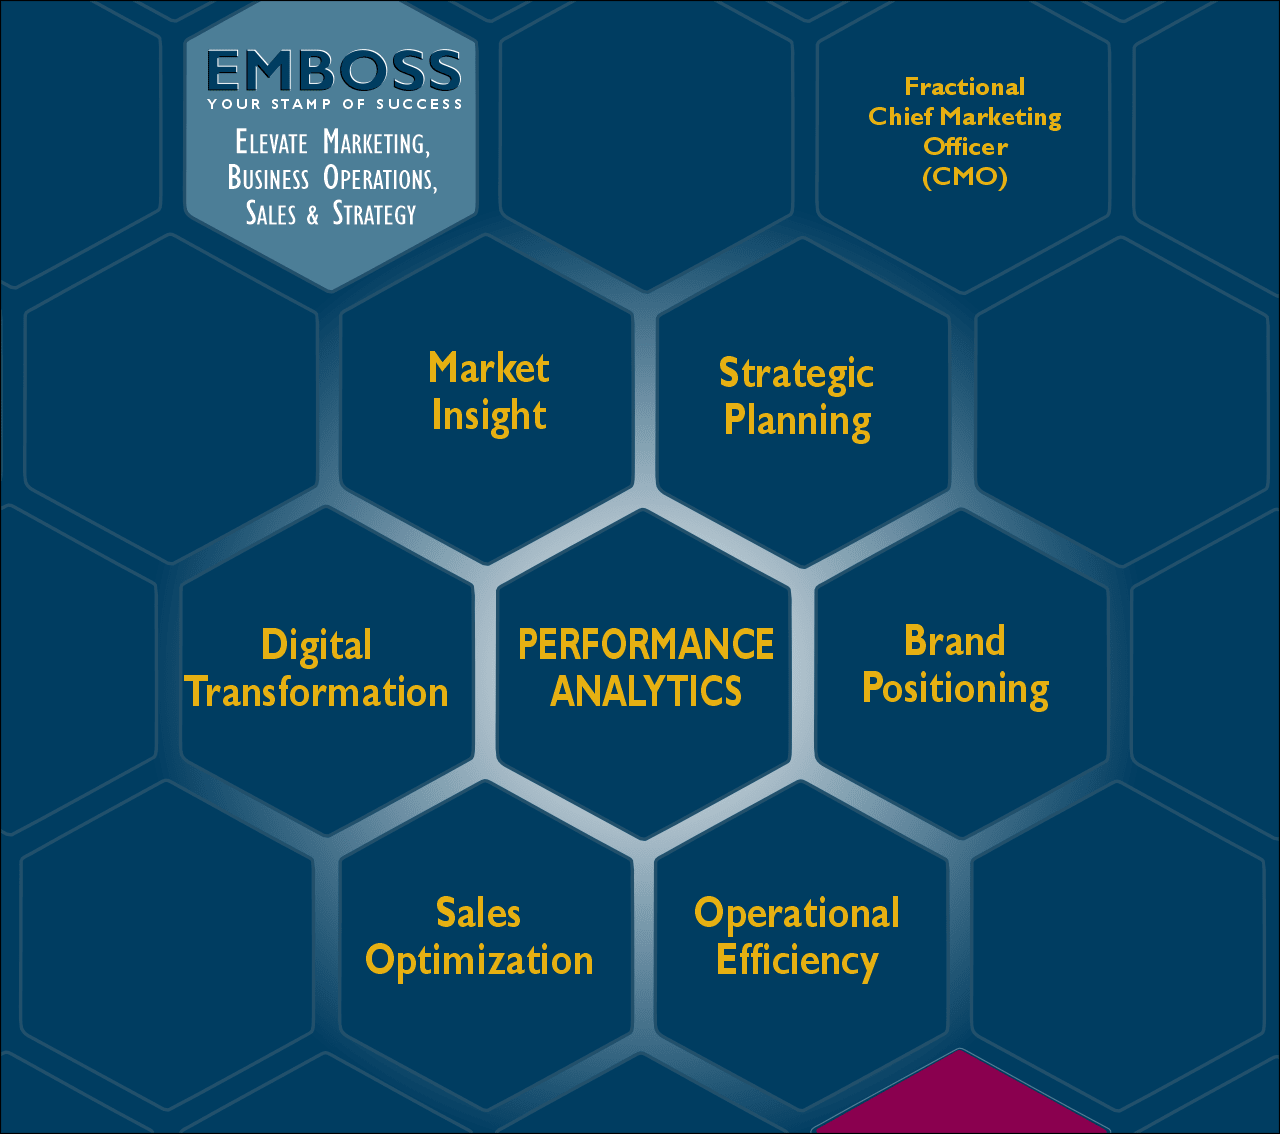 7 facets of the emboss consulting program